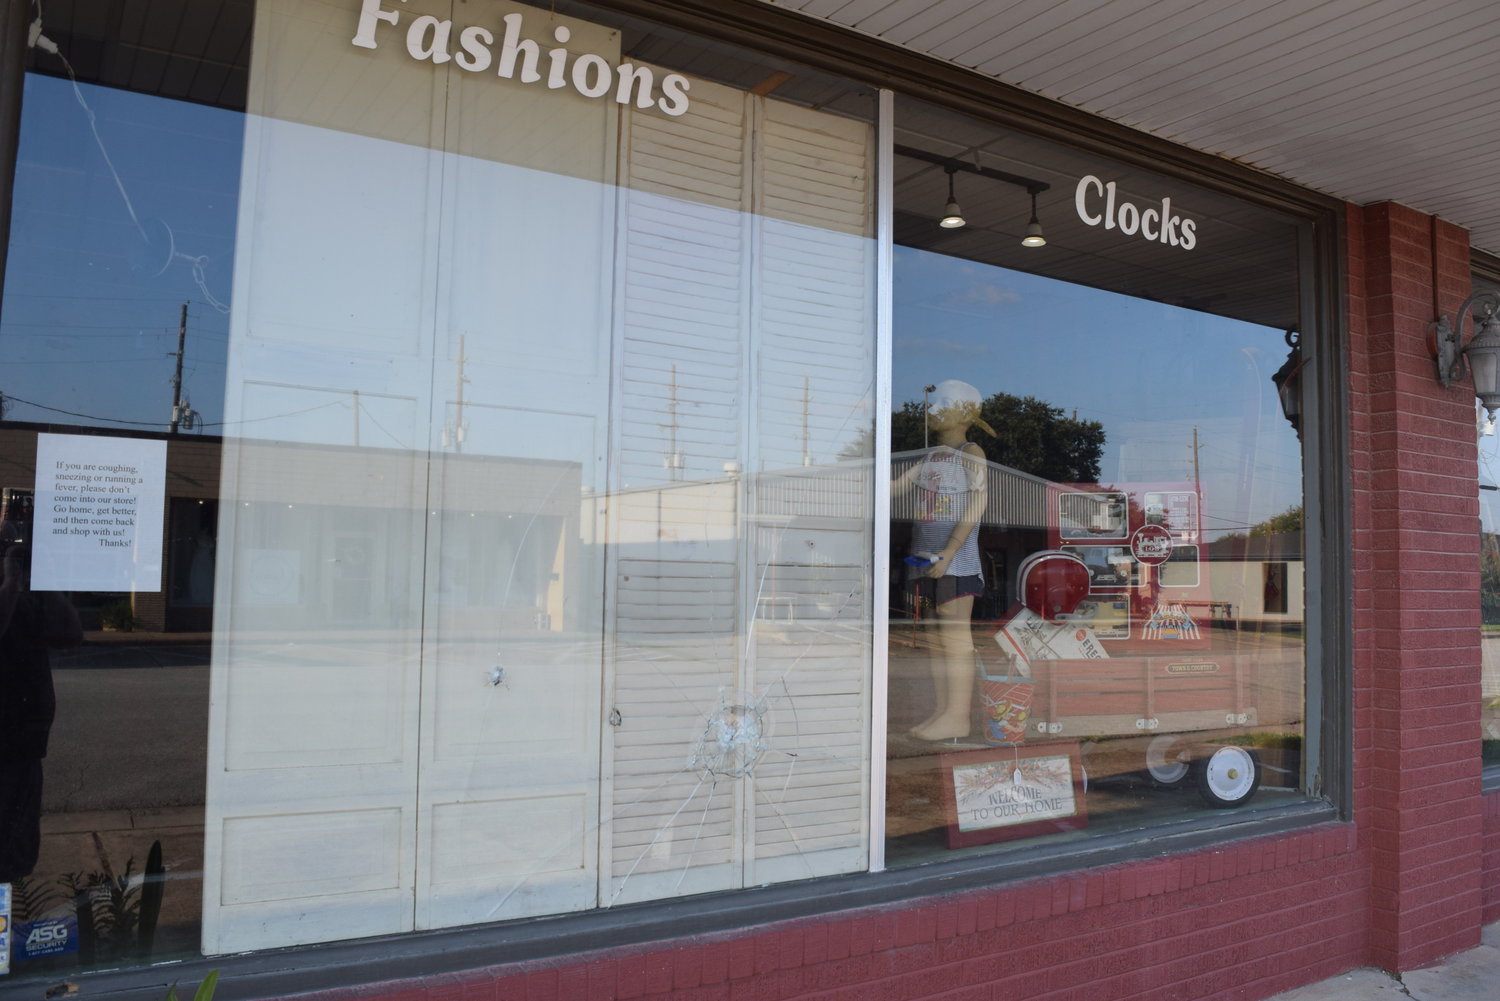 Across from Dovetail Antiques, the window to KT Antiques was smashed in Wednesday morning. Katy Times has not yet confirmed that the damage to KT Antiques was associated with the burglary.